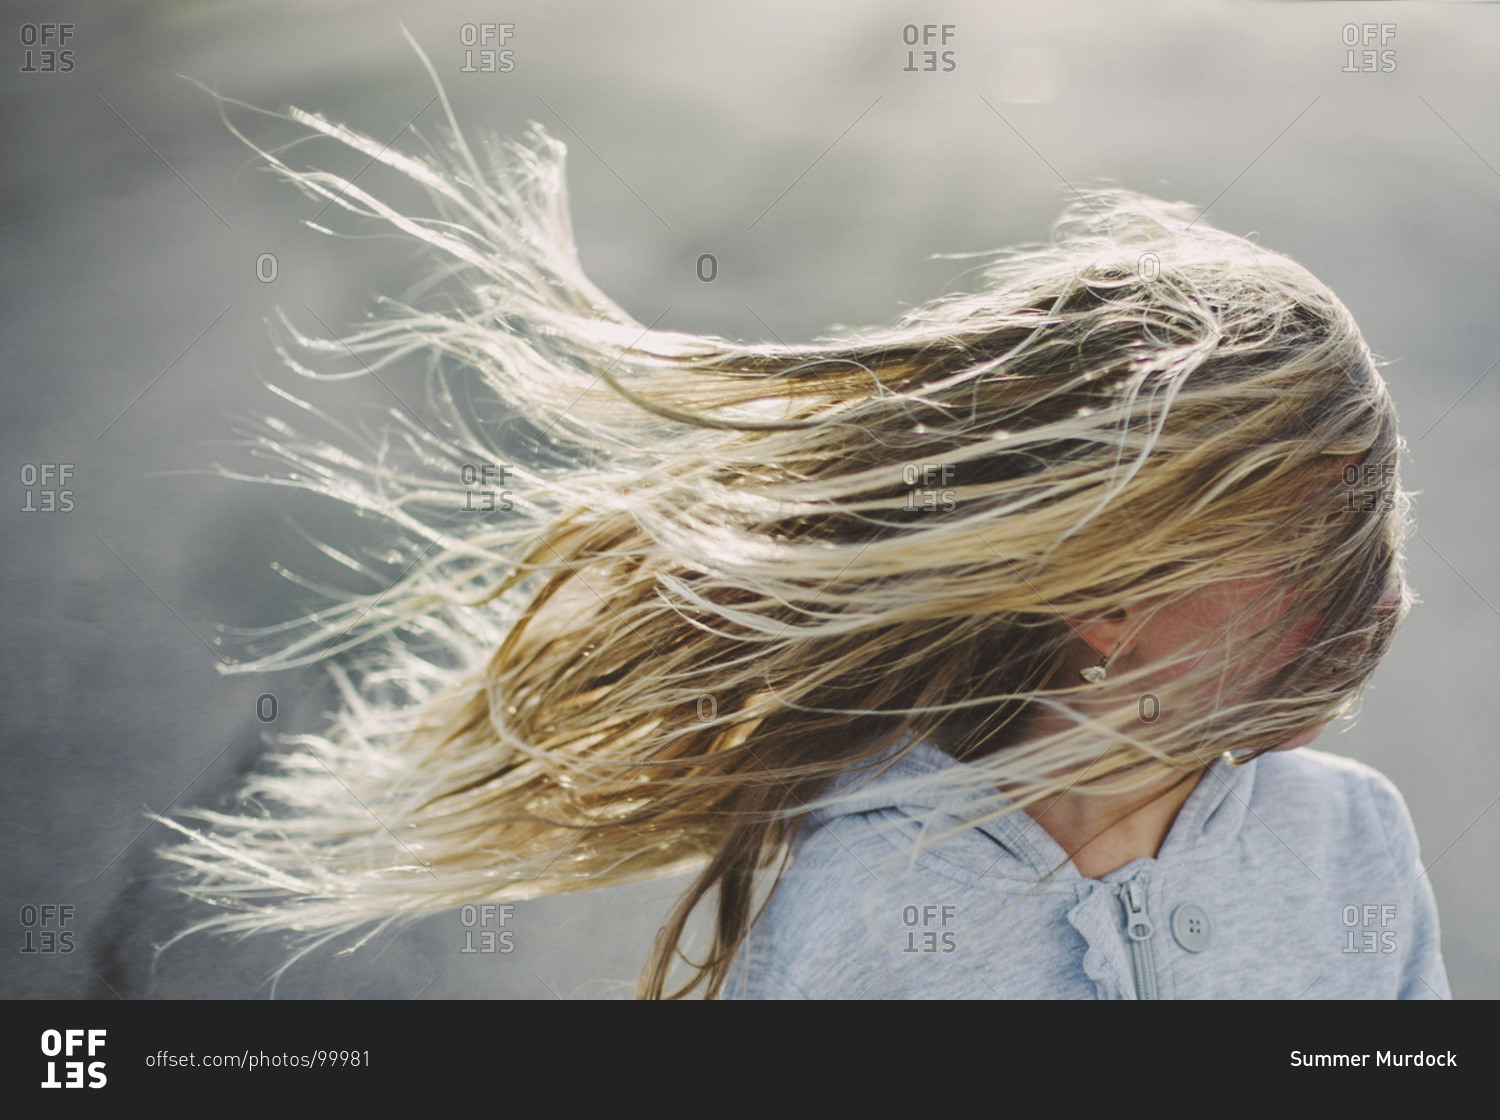 A blonde girl's hair blowing in the wind, obscuring her face